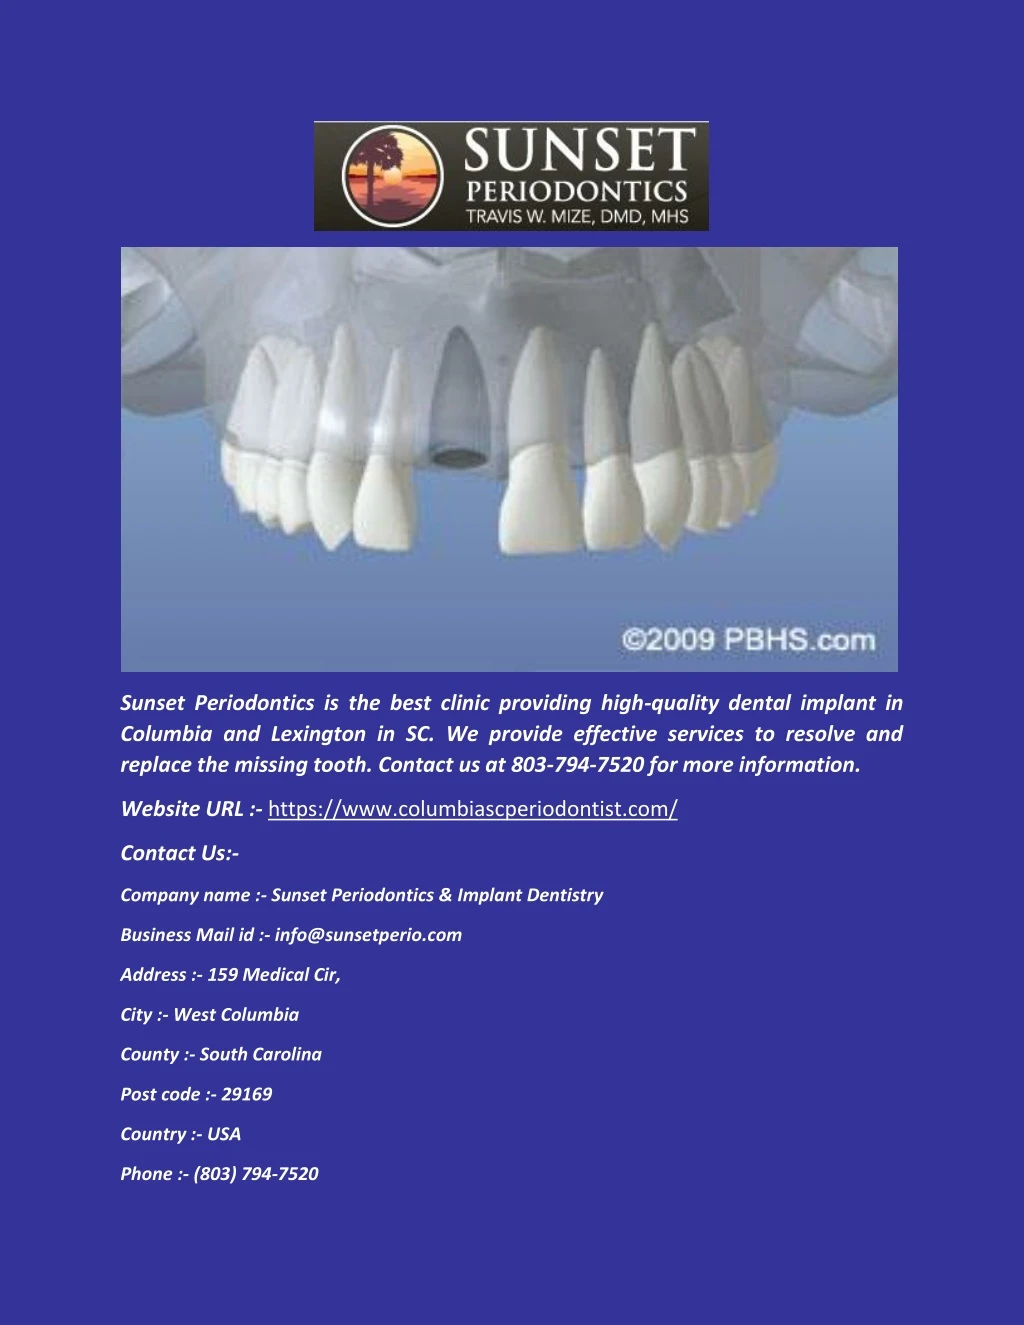 sunset periodontics is the best clinic providing